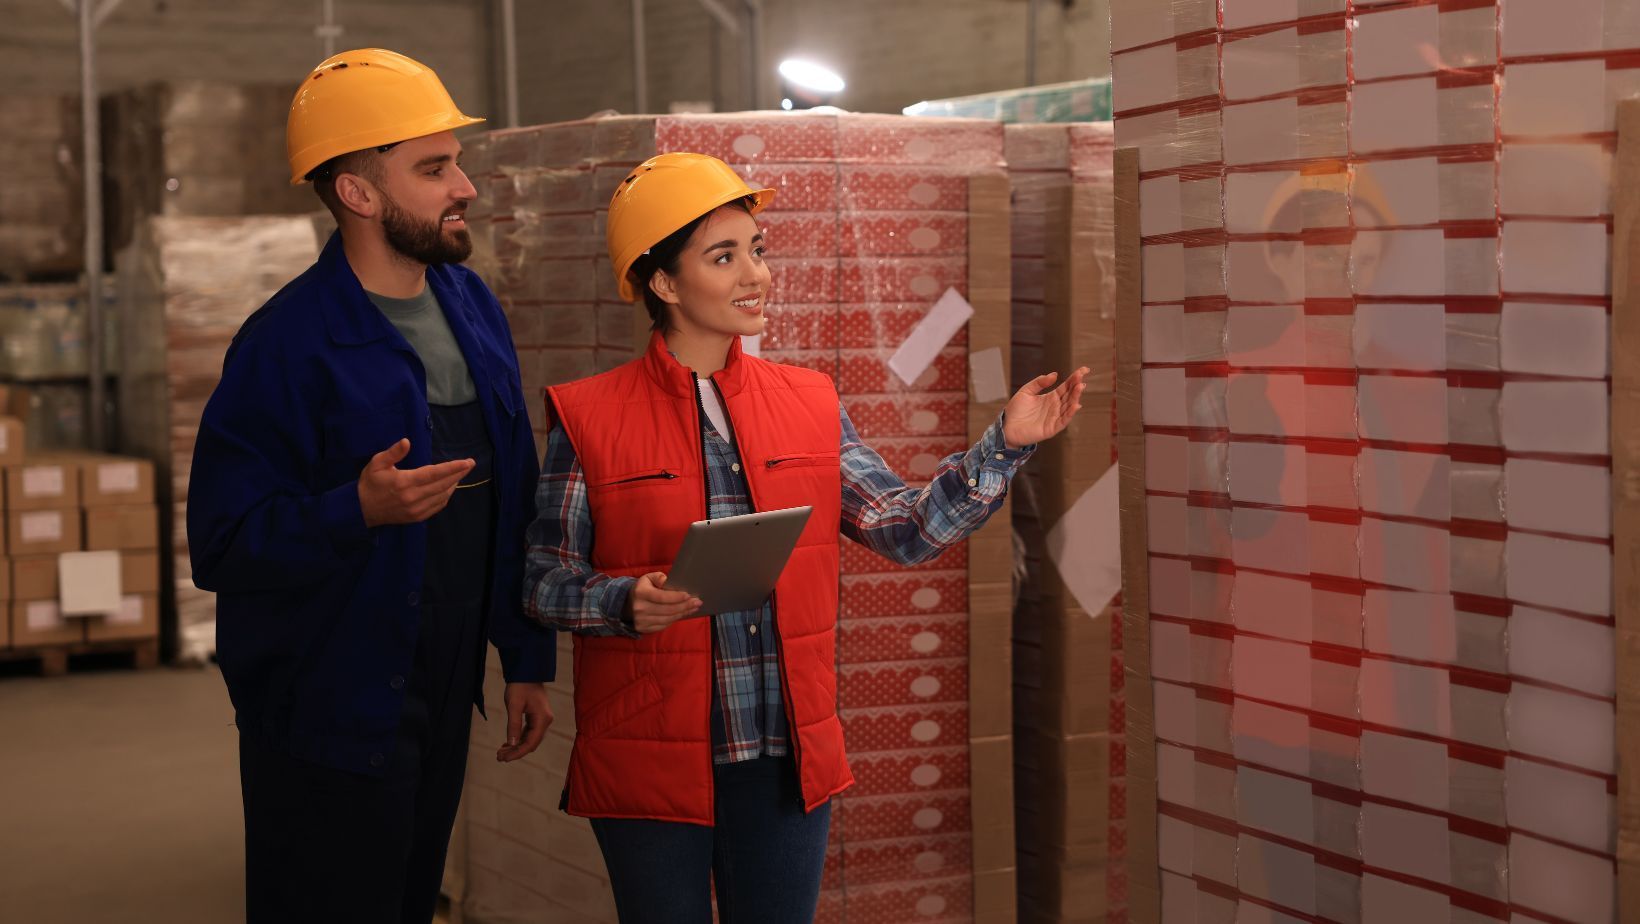 A man and a woman are standing in a warehouse looking at boxes.